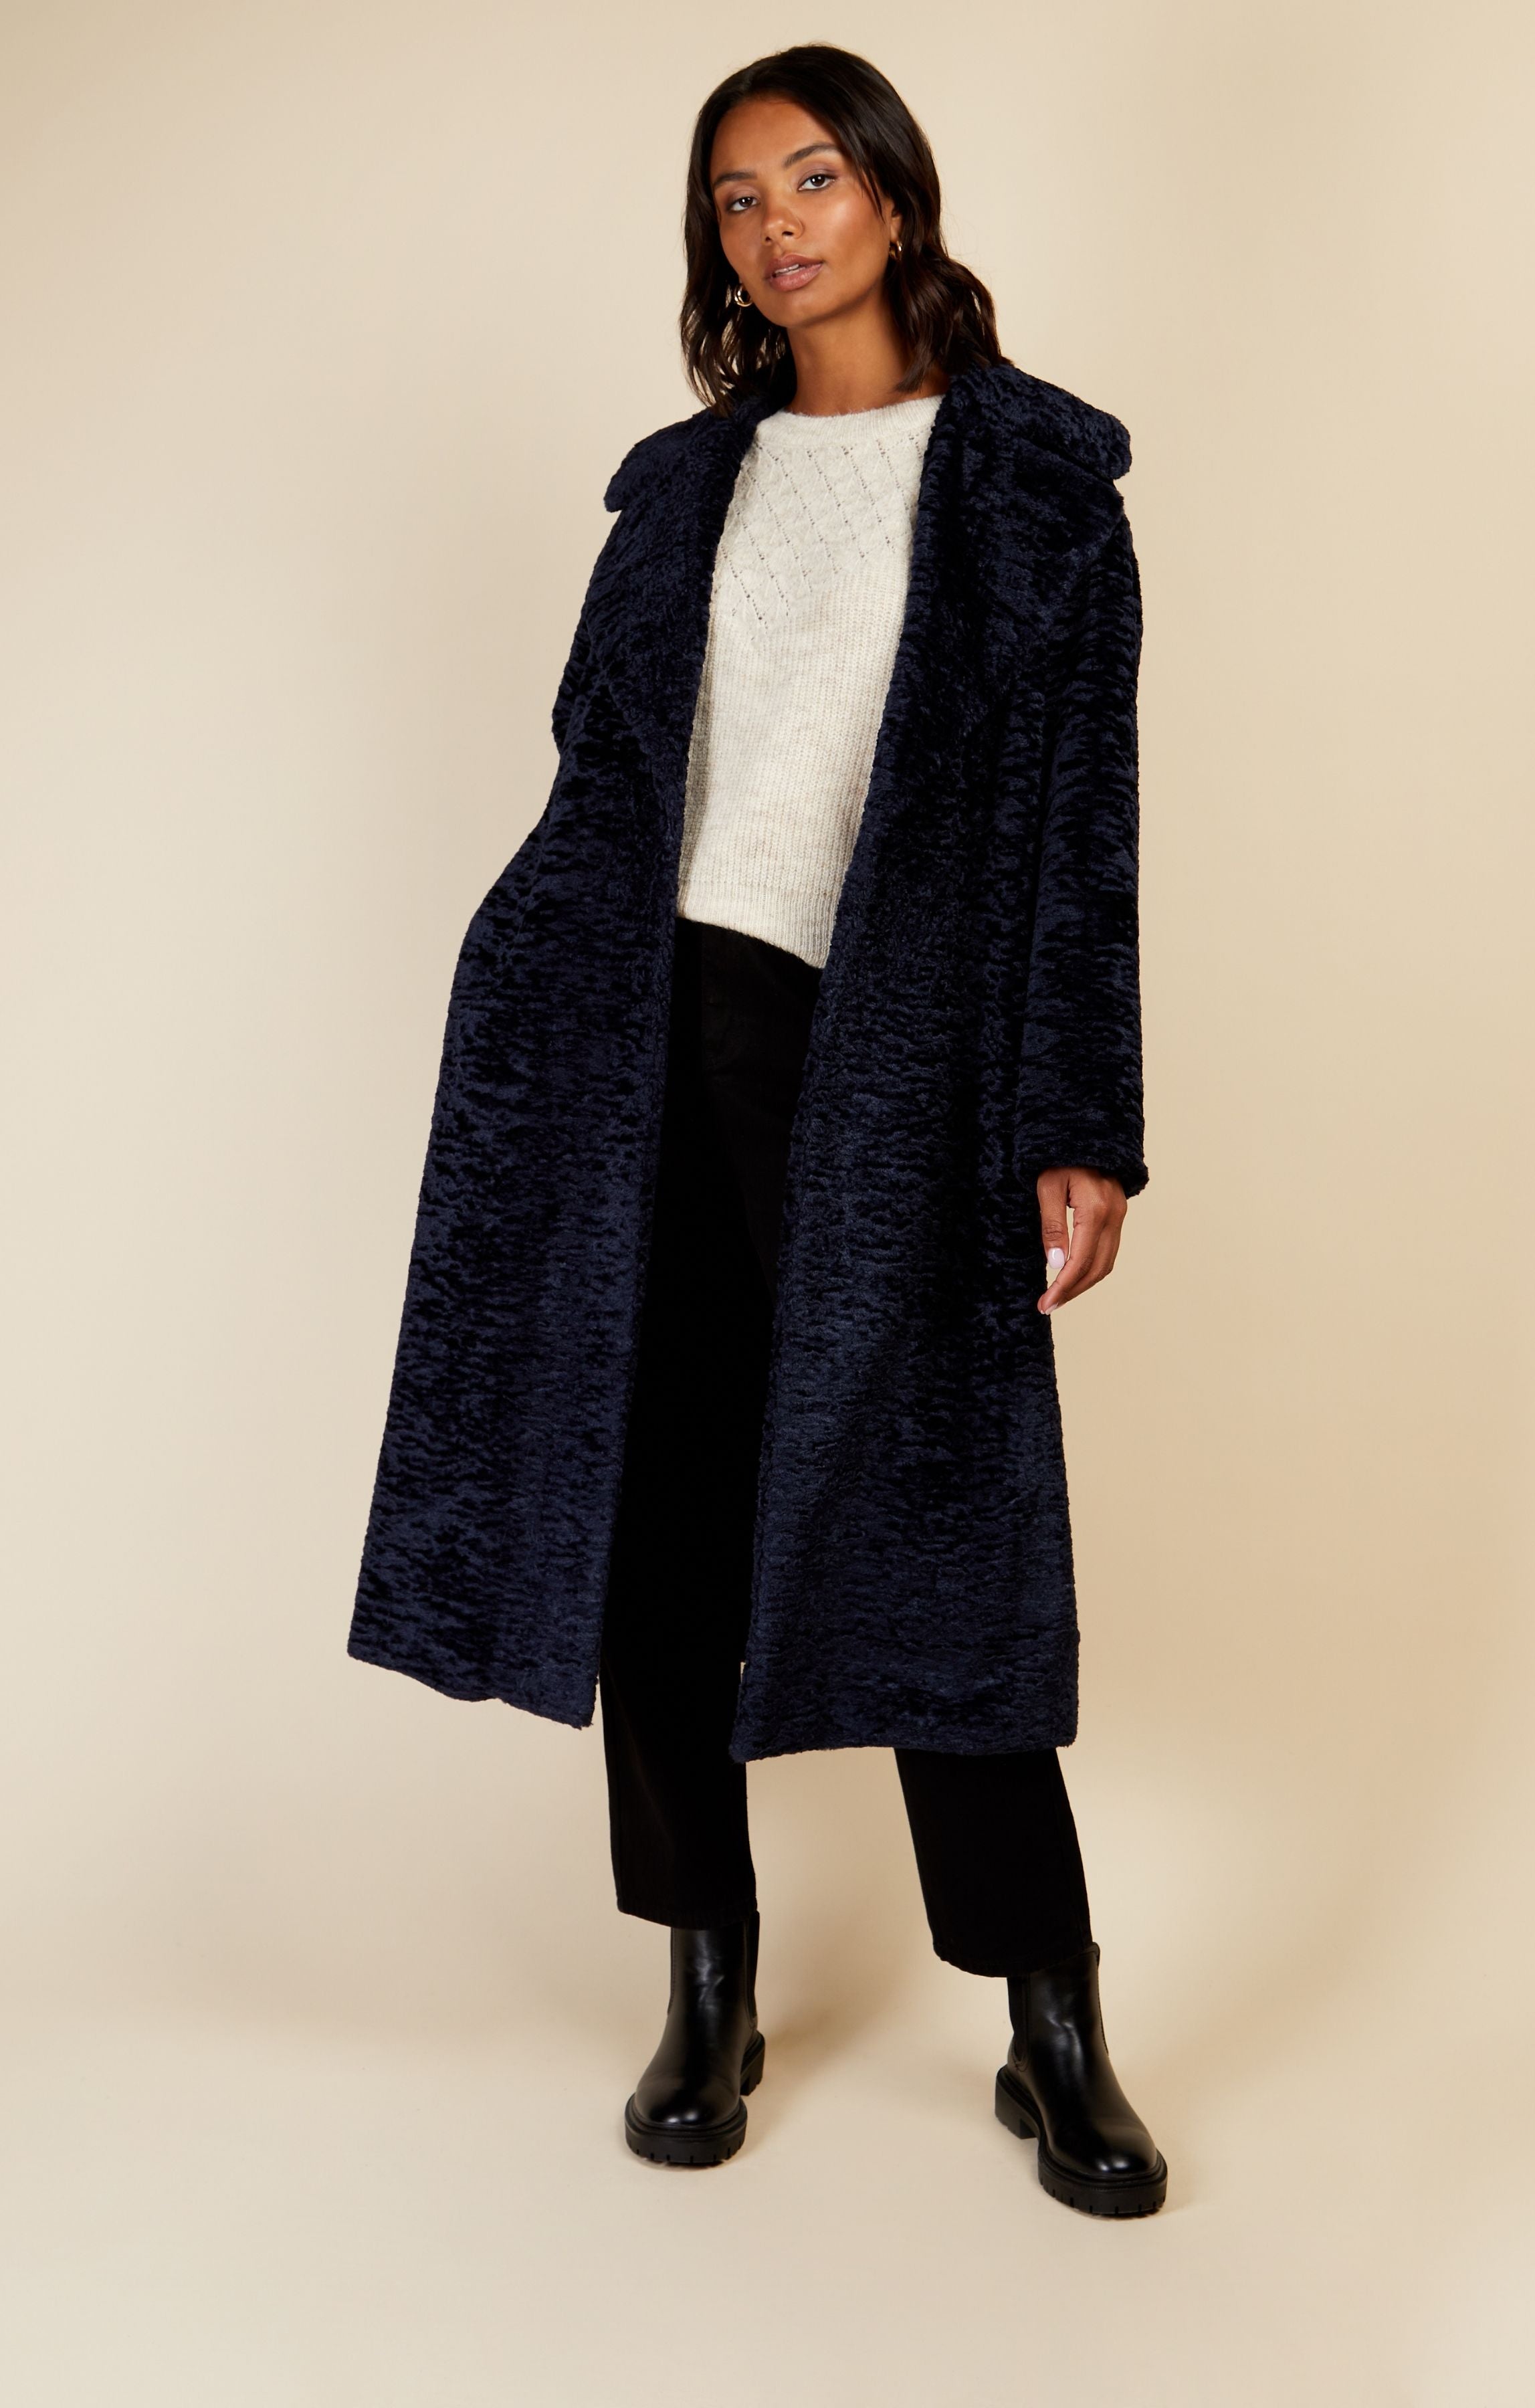 Little Mistress Navy Teddy Coat by Vogue Williams product image